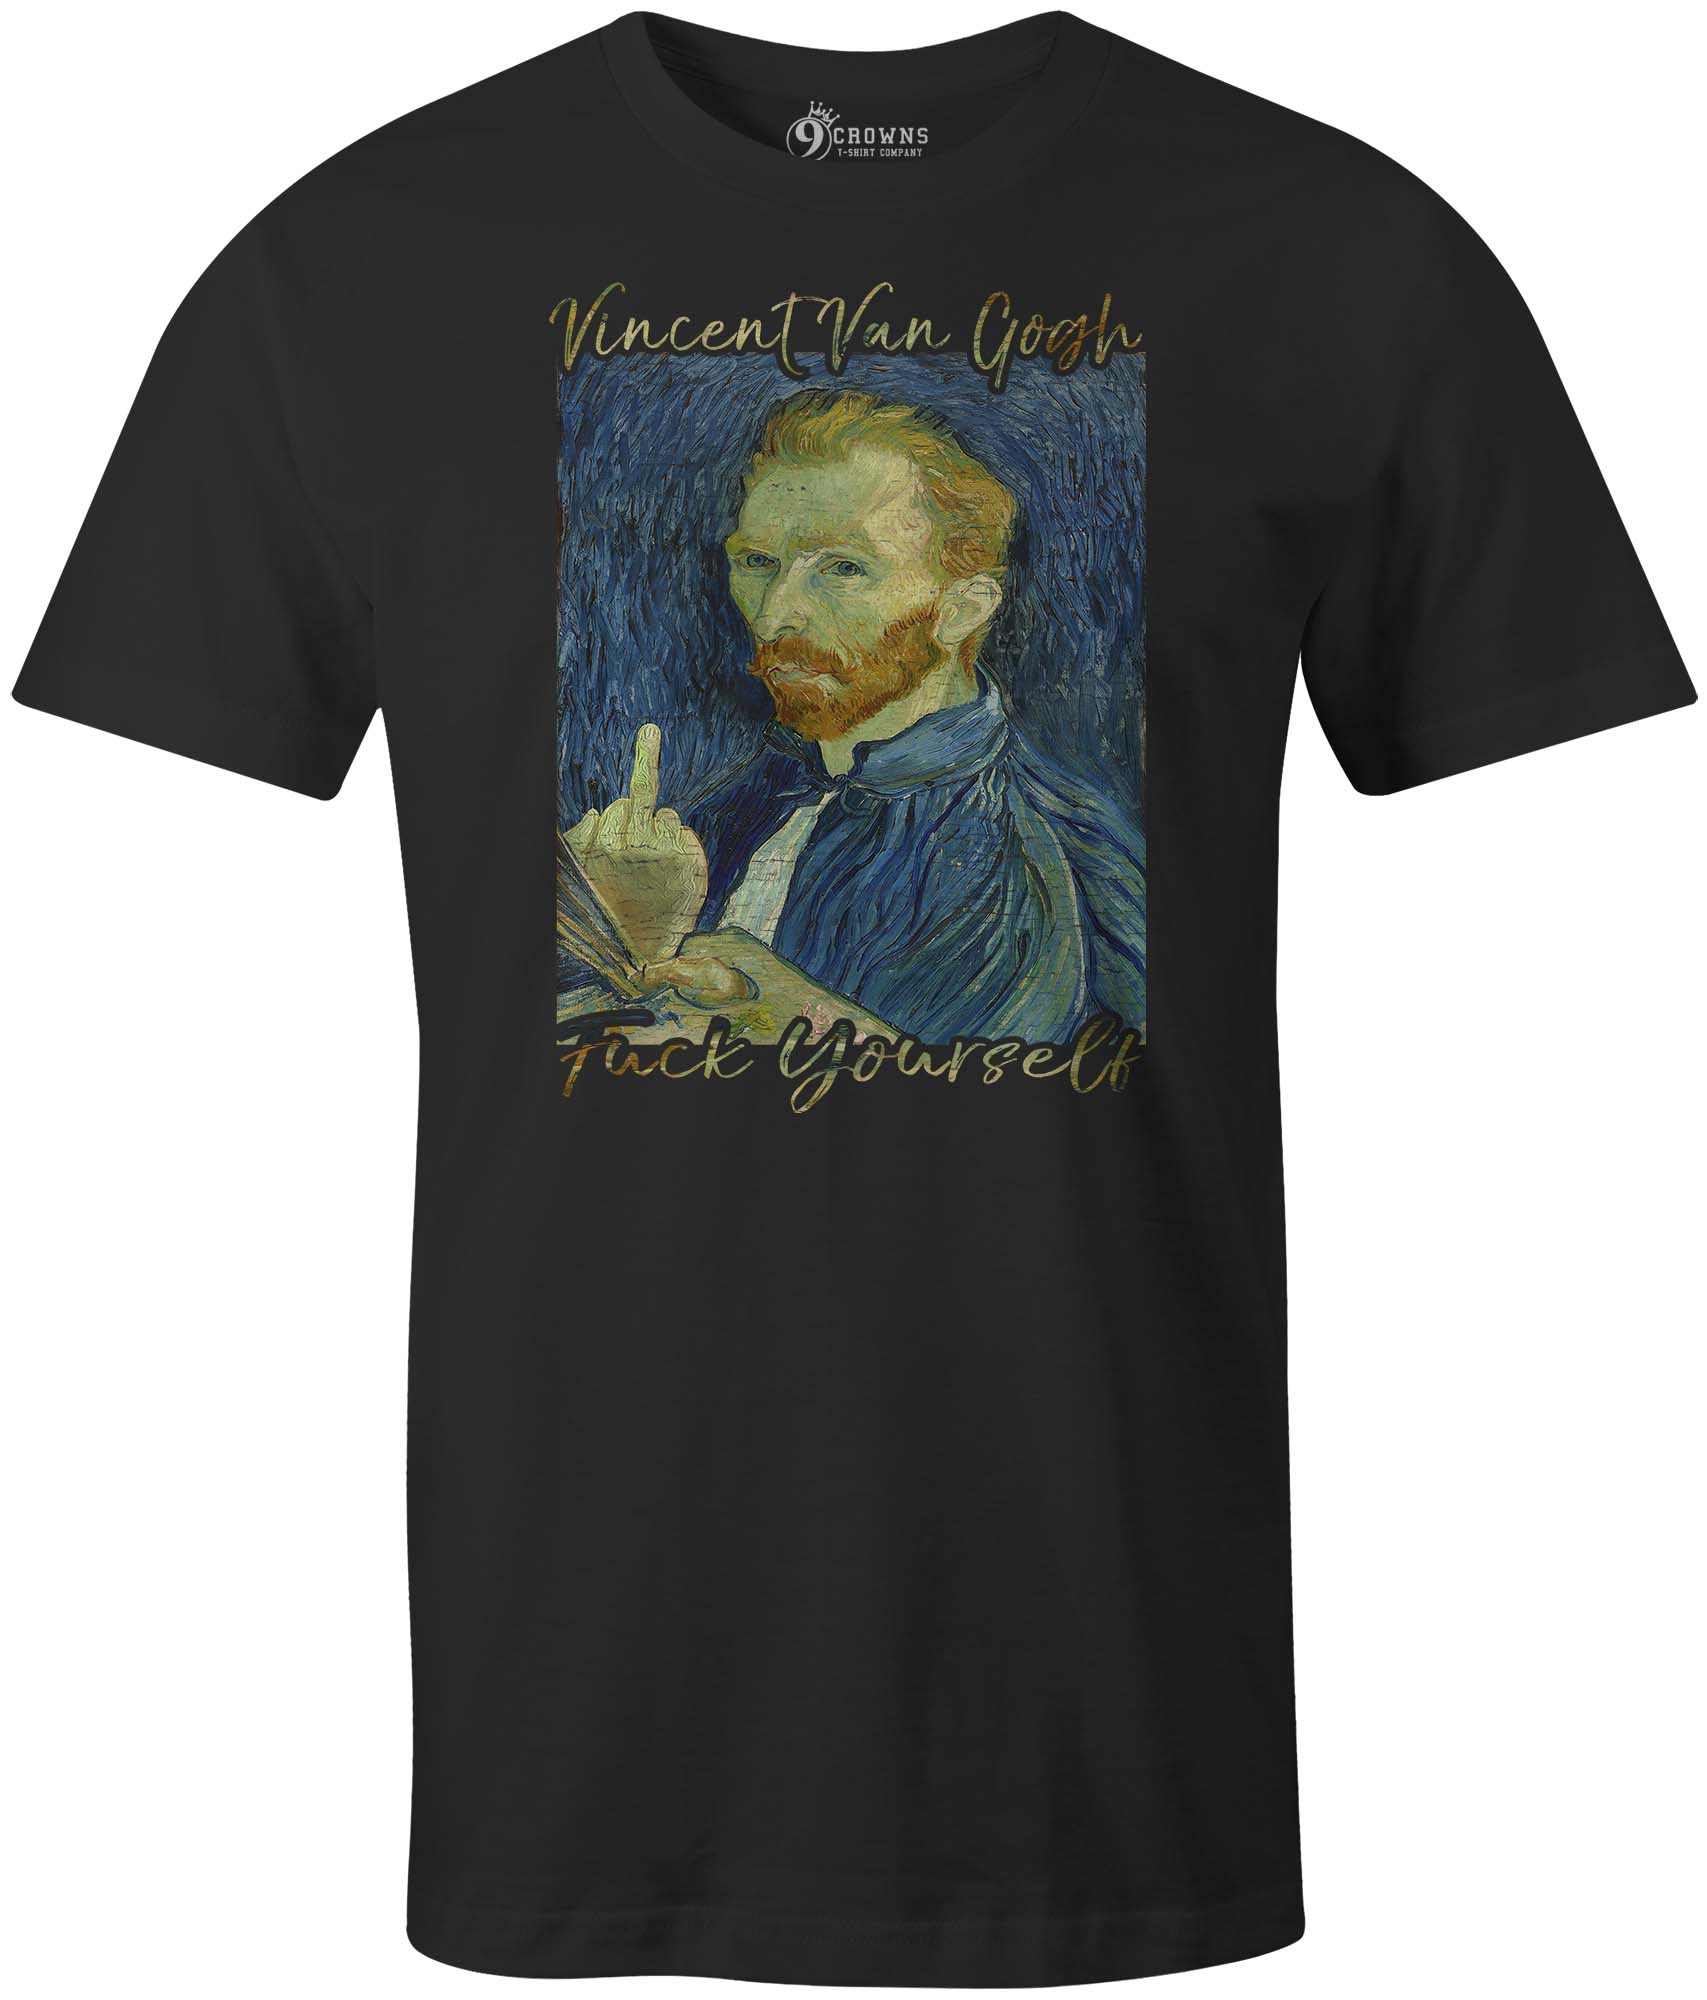 9 Crowns Tees Vincent Van Gogh F Yourself Funny Graphic T-Shirt | eBay